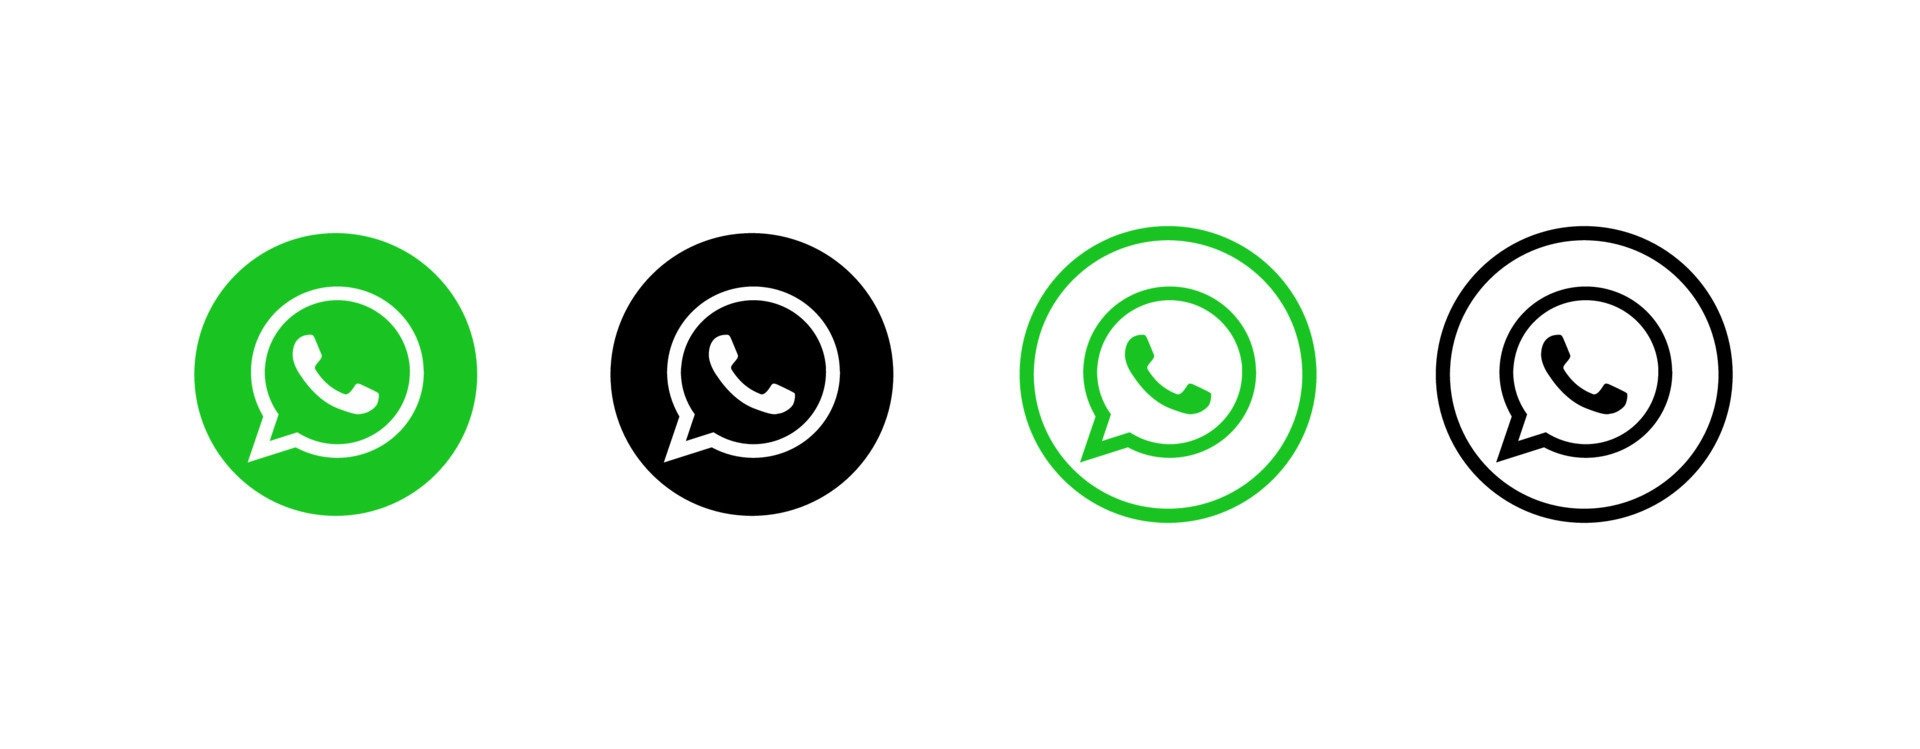 WhatsApp Features Checklist 3D Avatars, Message Yourself, More